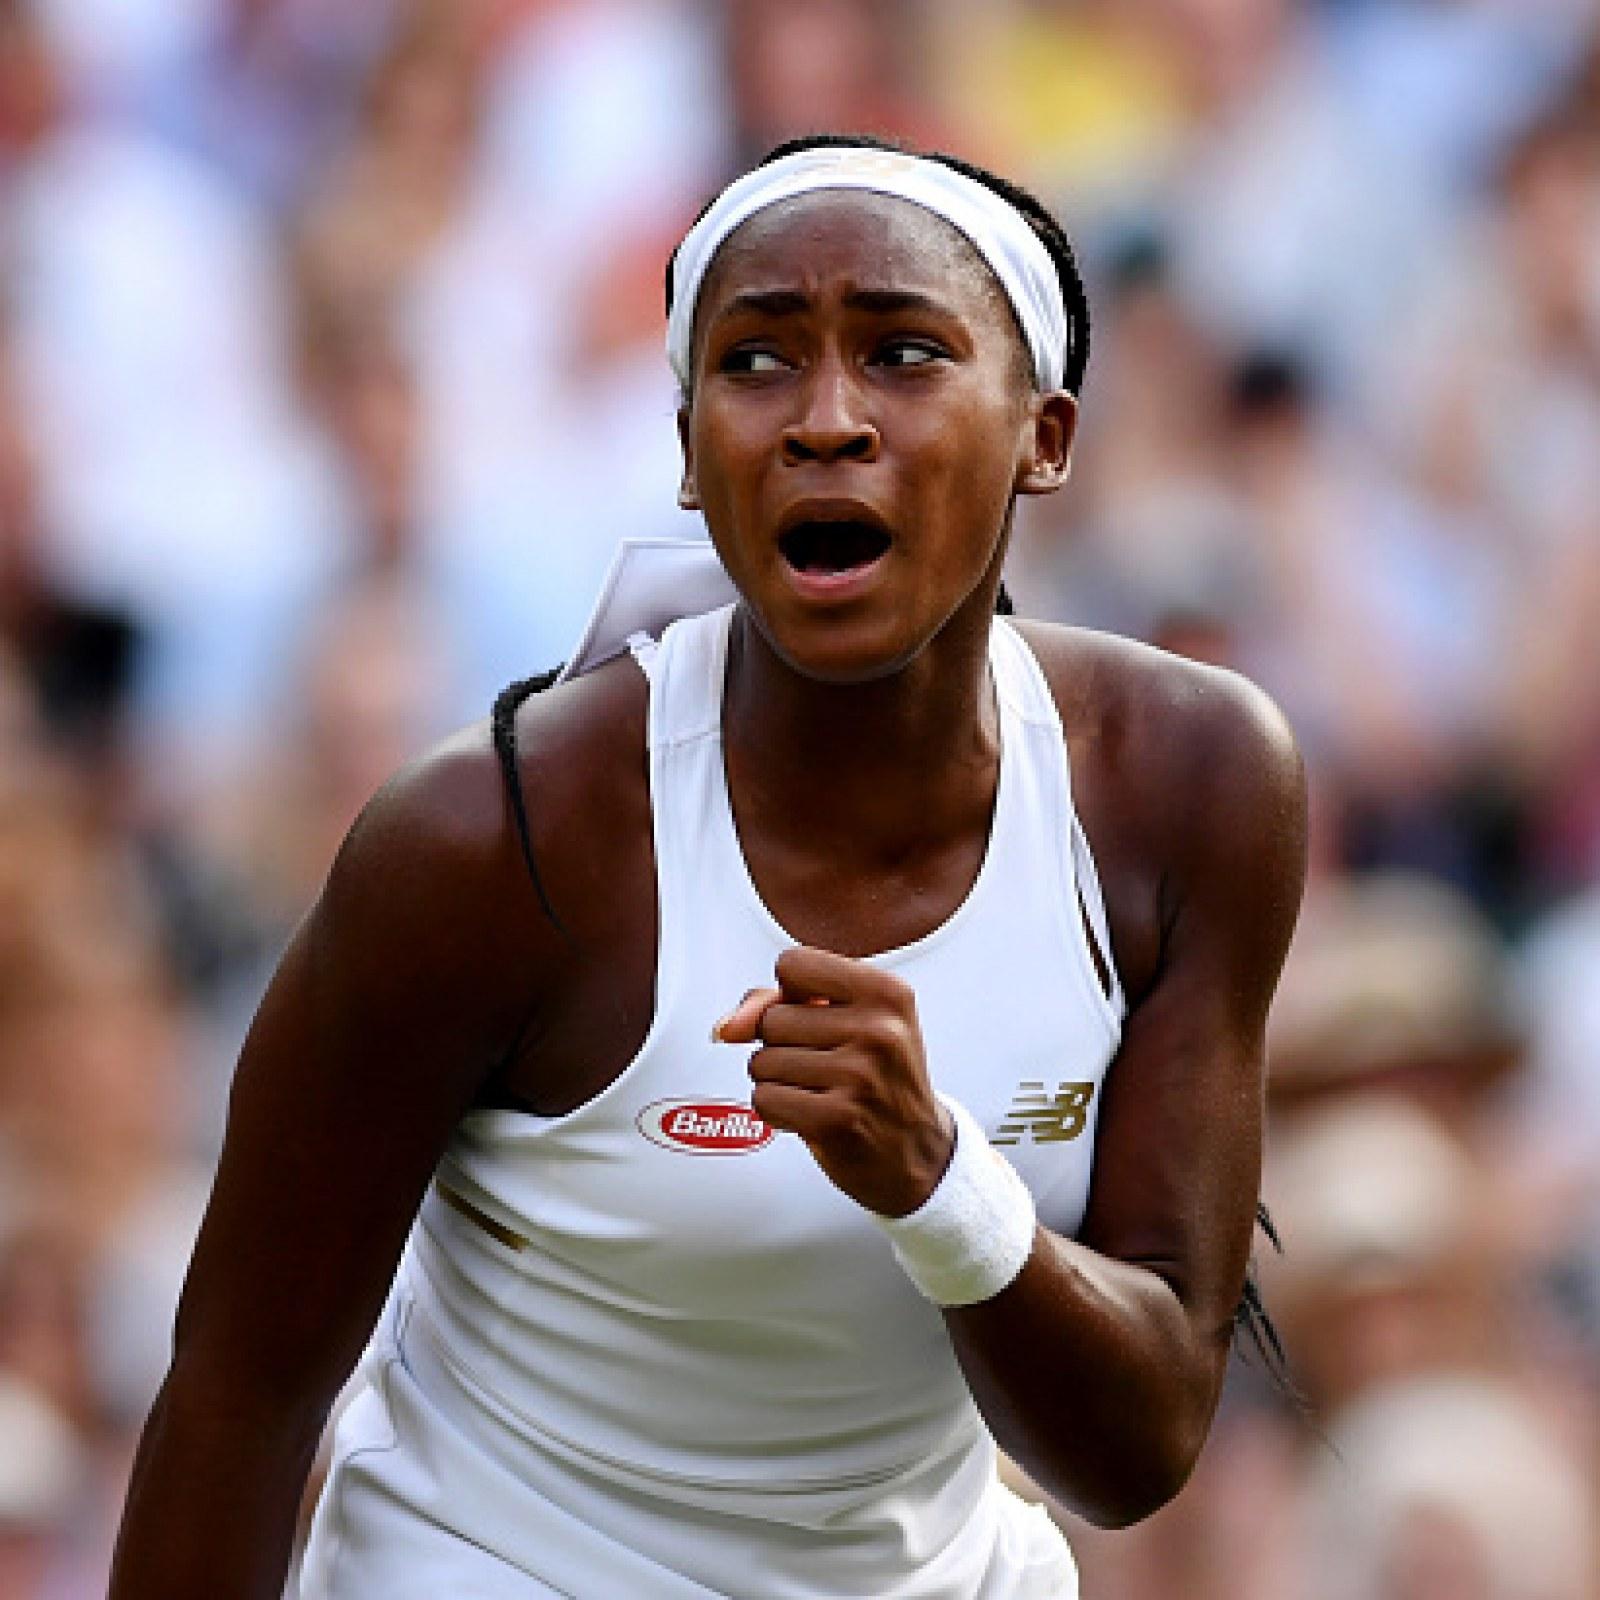 Coco Gauff Wins Again at Wimbledon; When Will She Play Next, and Who